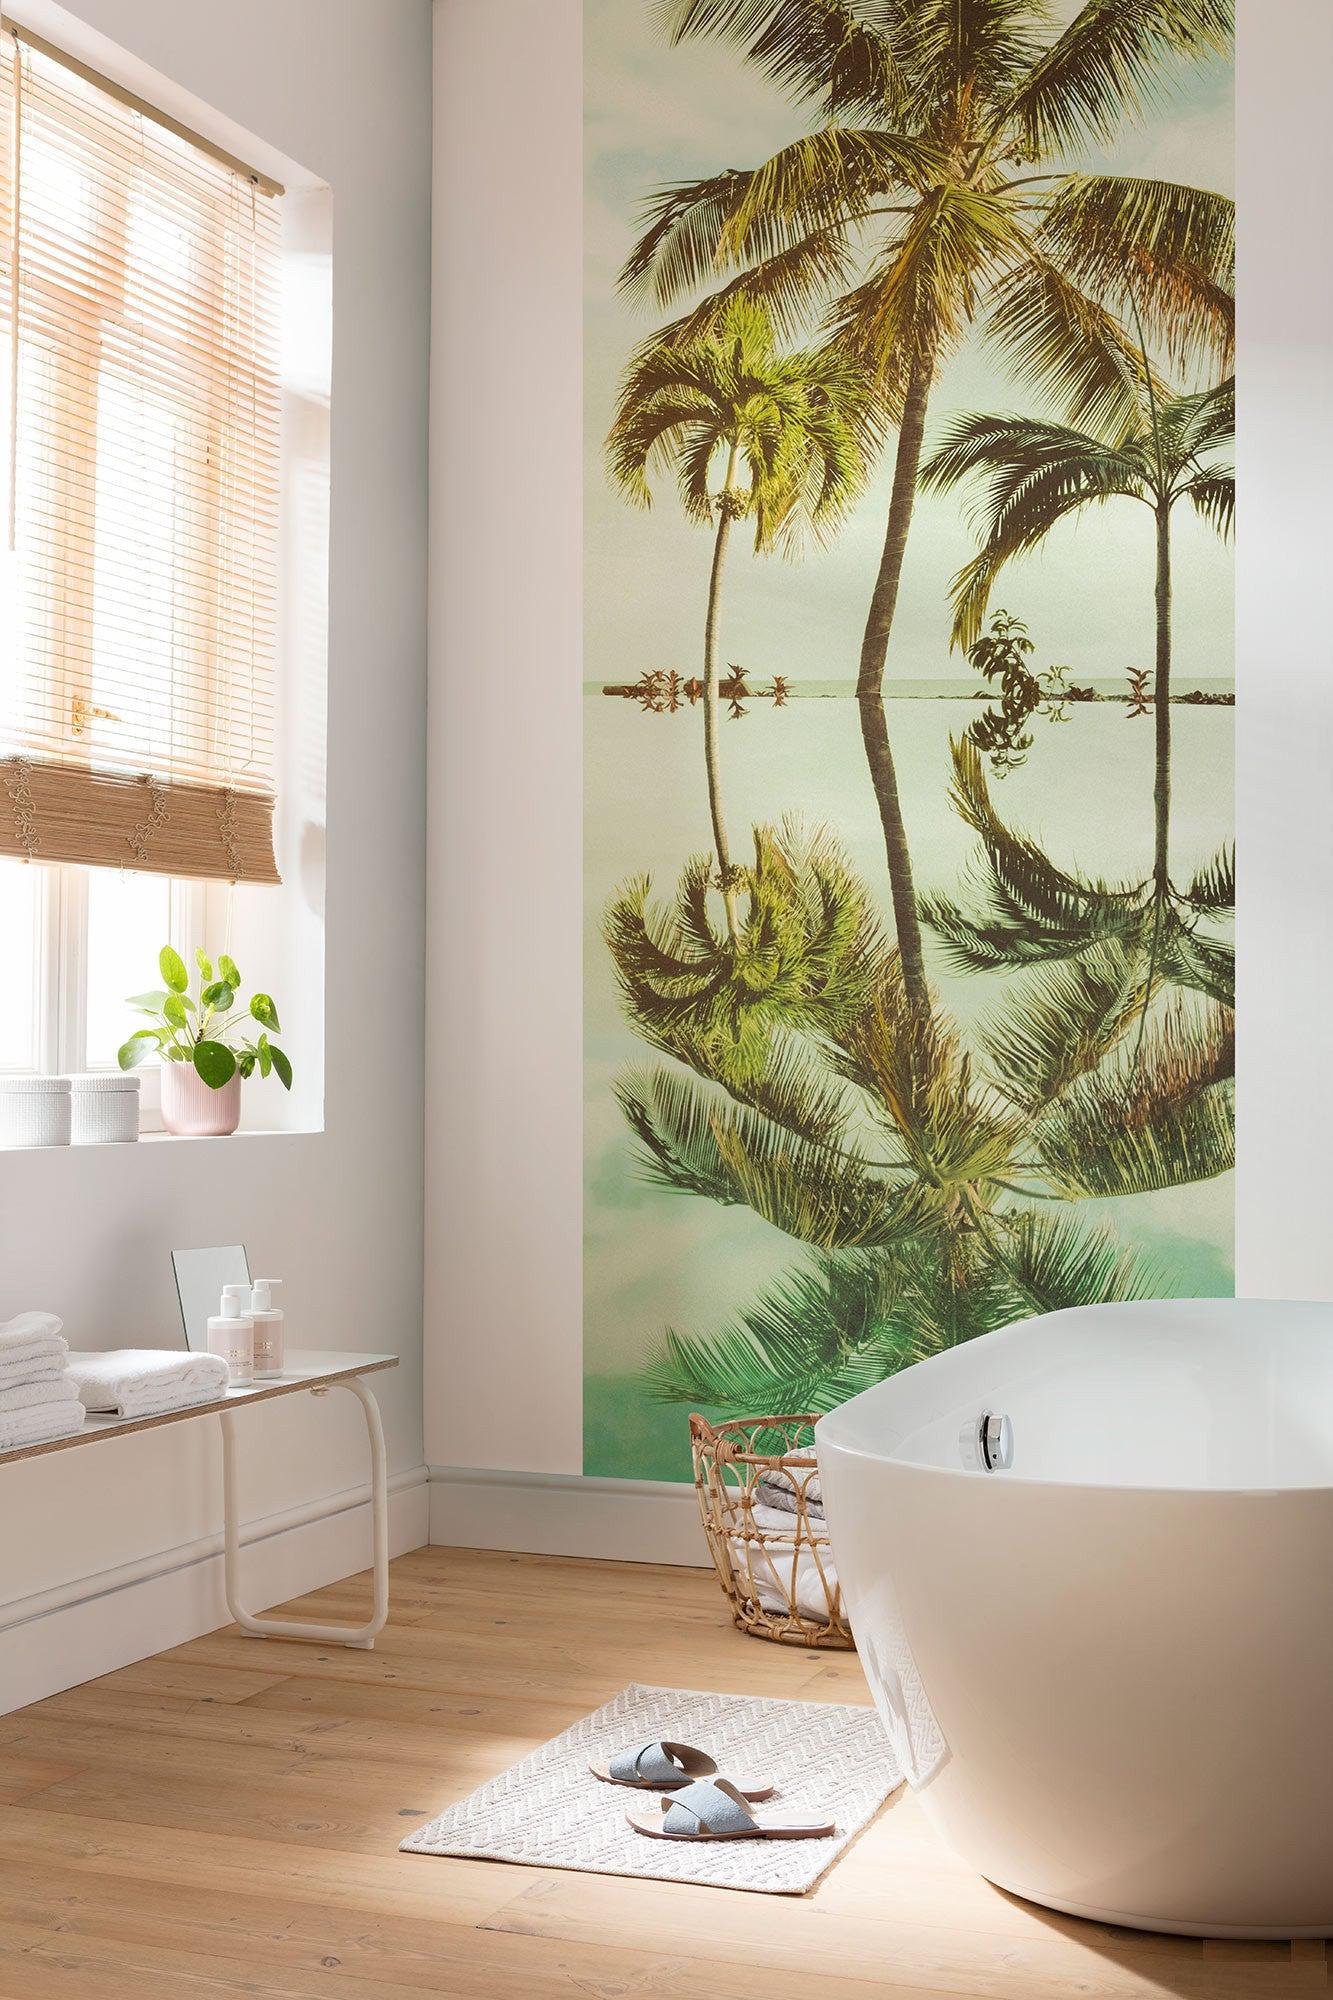 Mirror in the Palms Mural Wallpaper-Wall Decor-ECO MURALS, JUNGLE WALLPAPER, MURALS, MURALS / WALLPAPERS, NON-WOVEN WALLPAPER, PALM WALLPAPER, TROPICAL MURAL-Forest Homes-Nature inspired decor-Nature decor